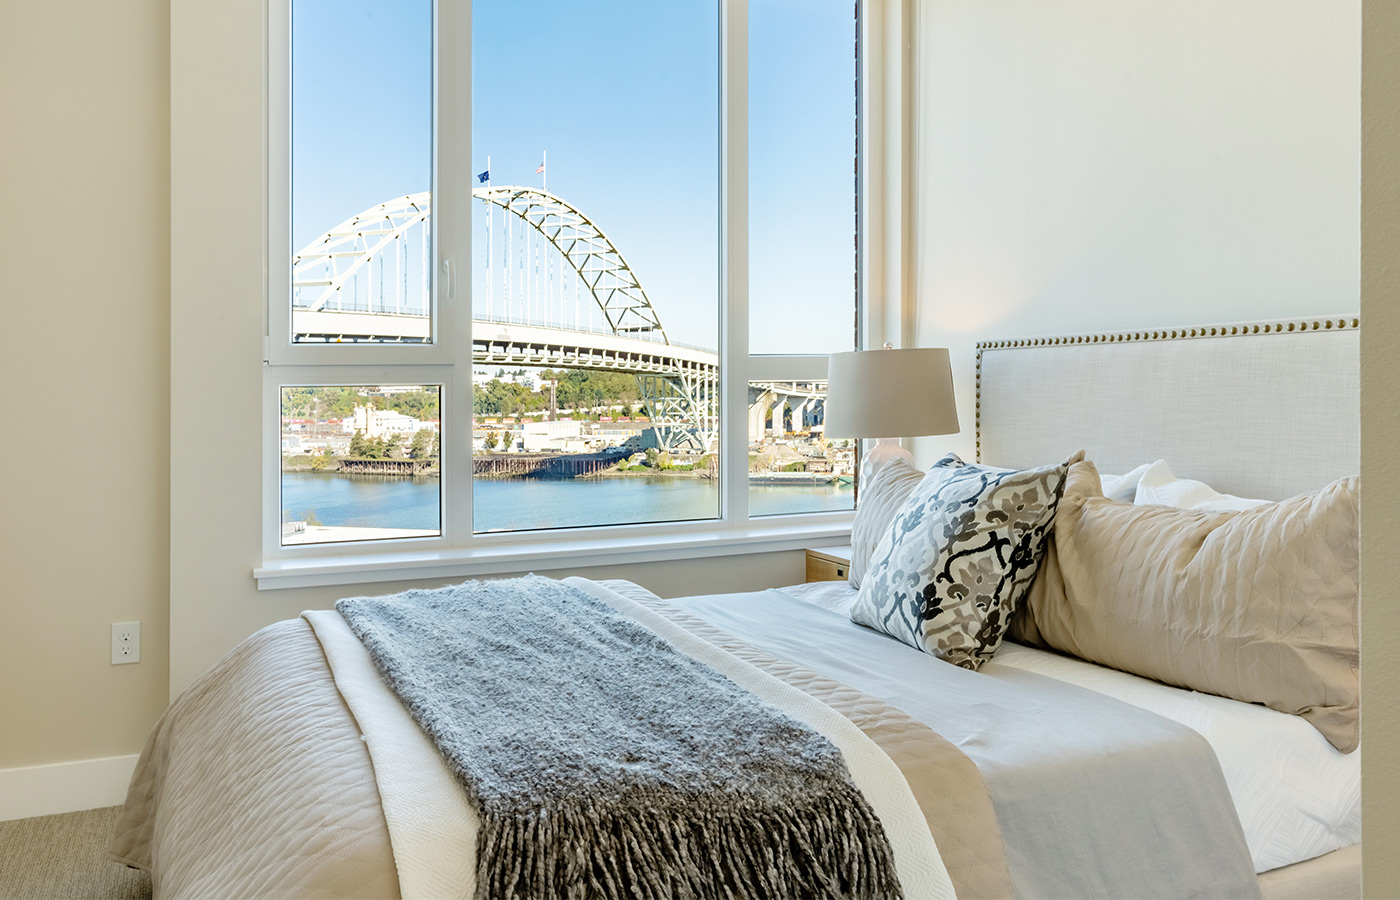 A fully furnished bedroom with a view of the river outside the window.